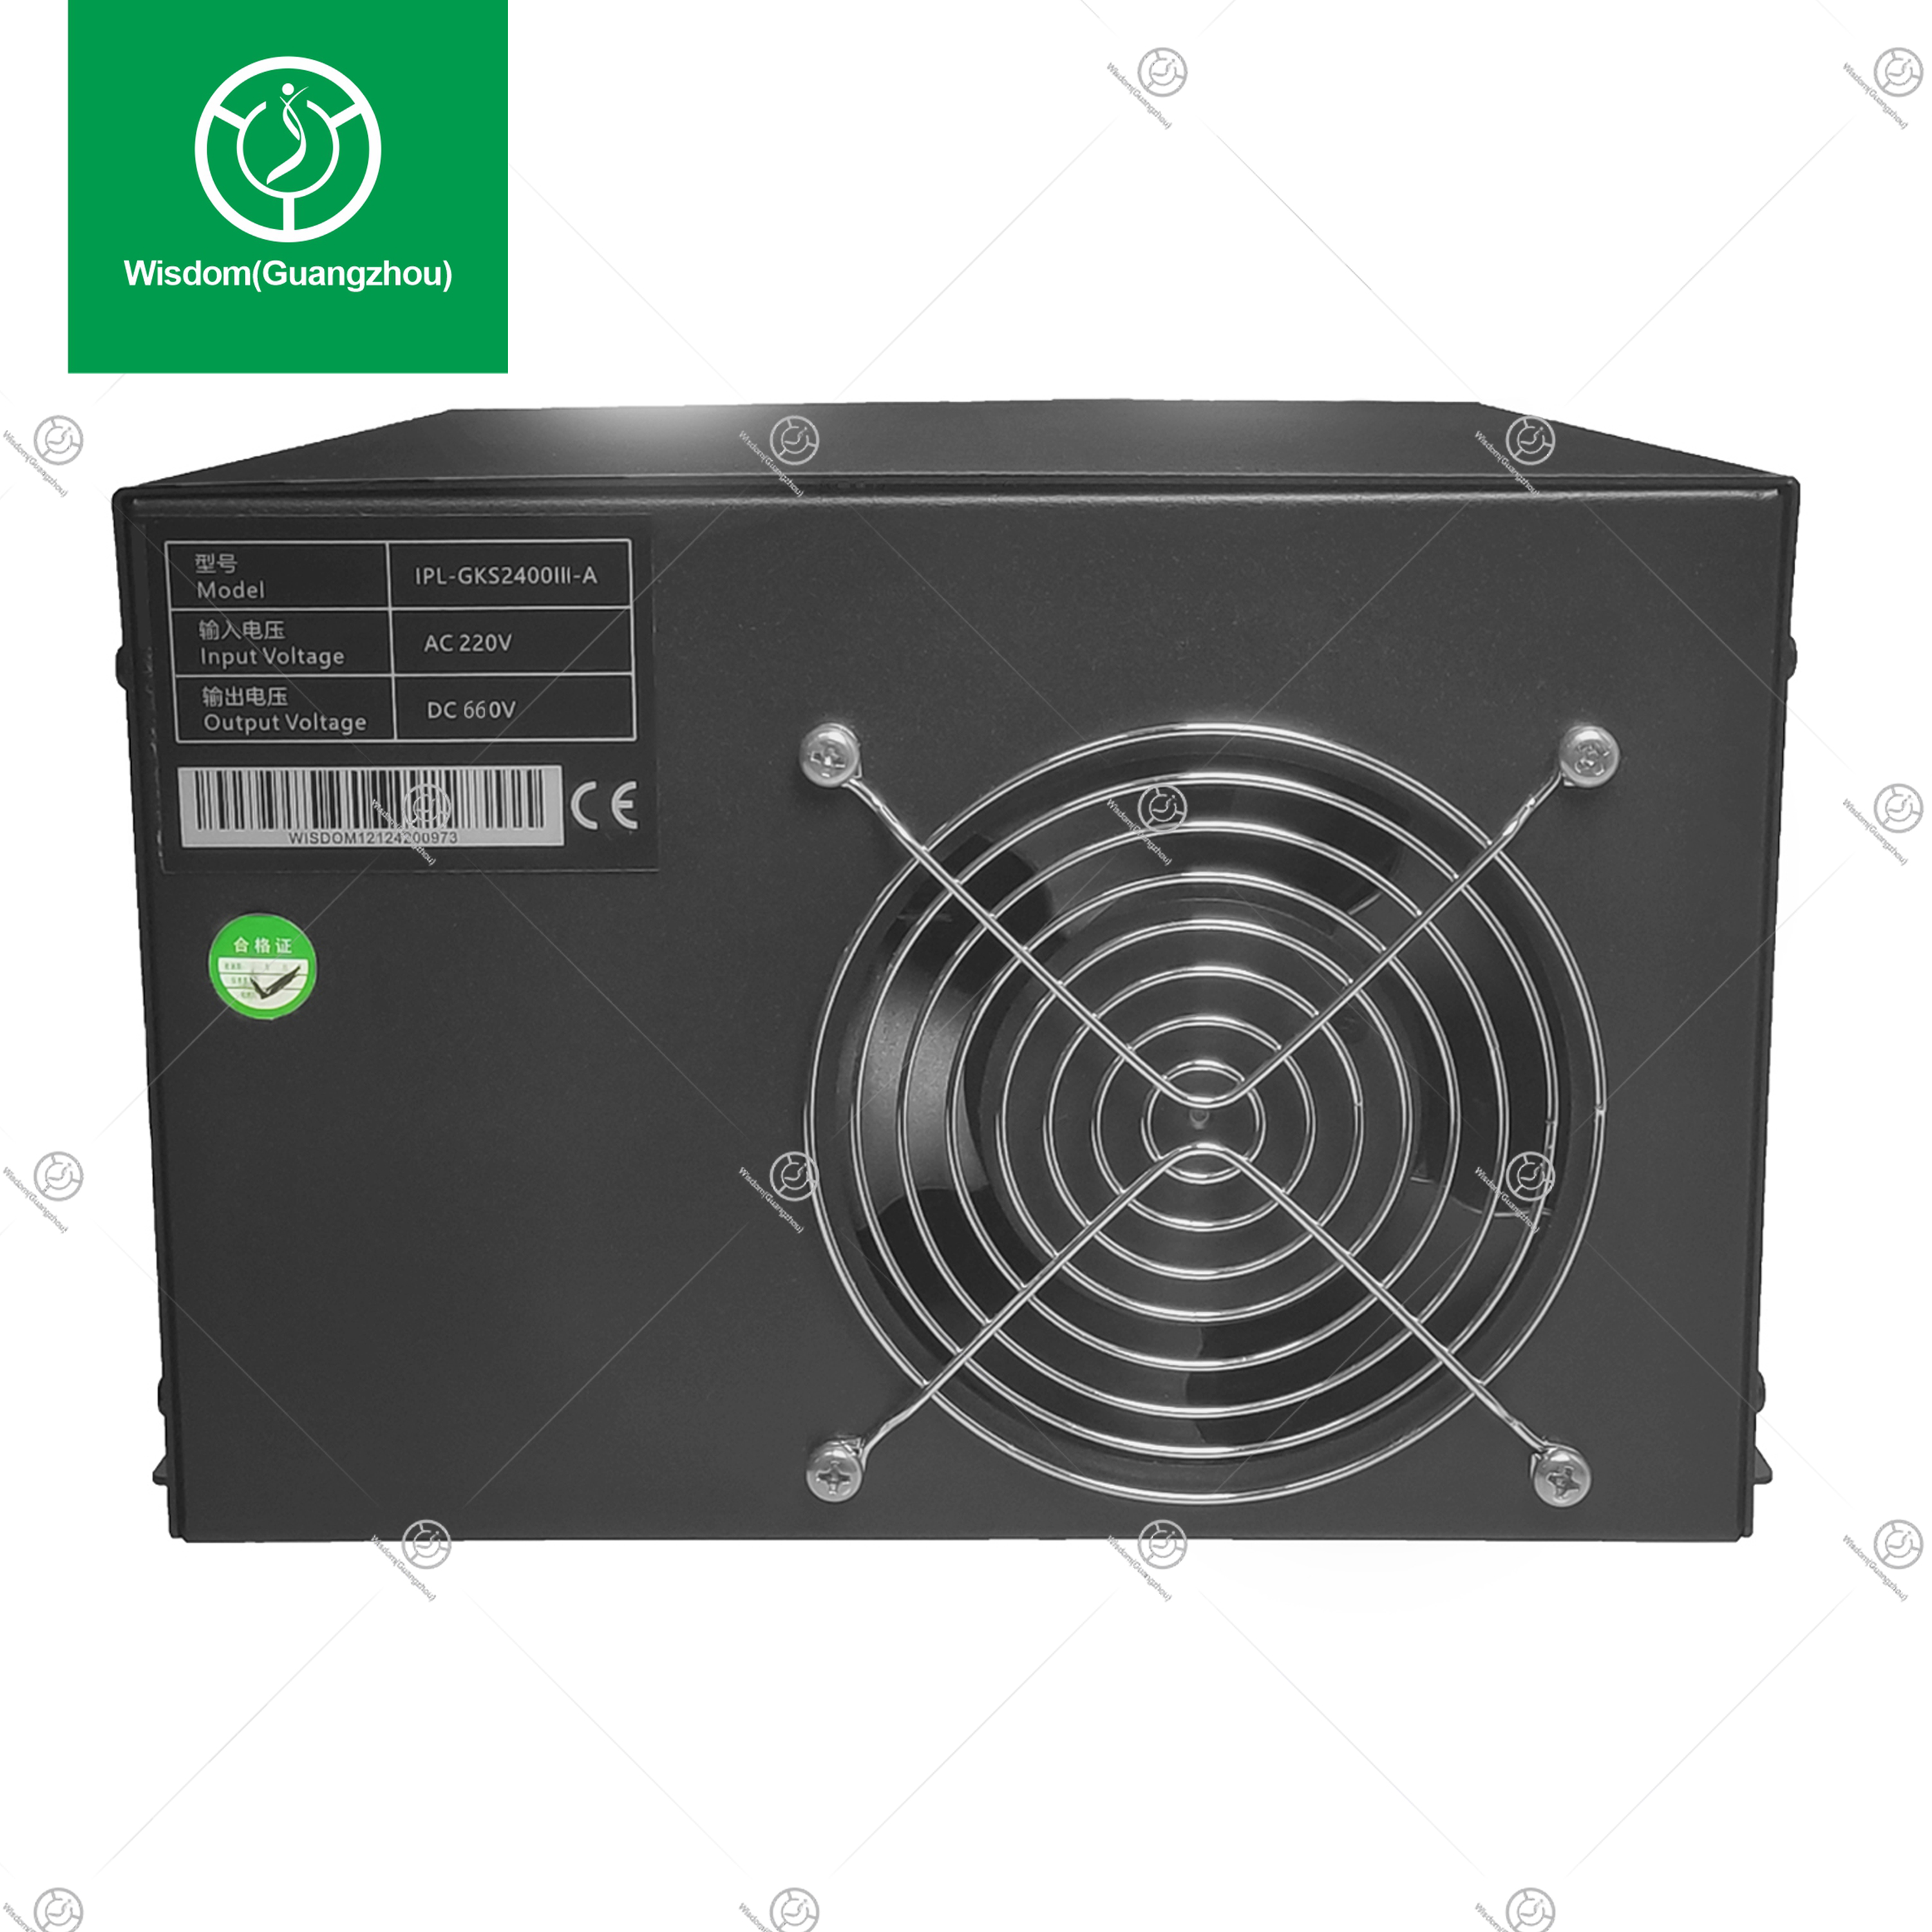 2400W/660V Guaranteed Quality Power Supply for IPL Tighten Skin Equipment